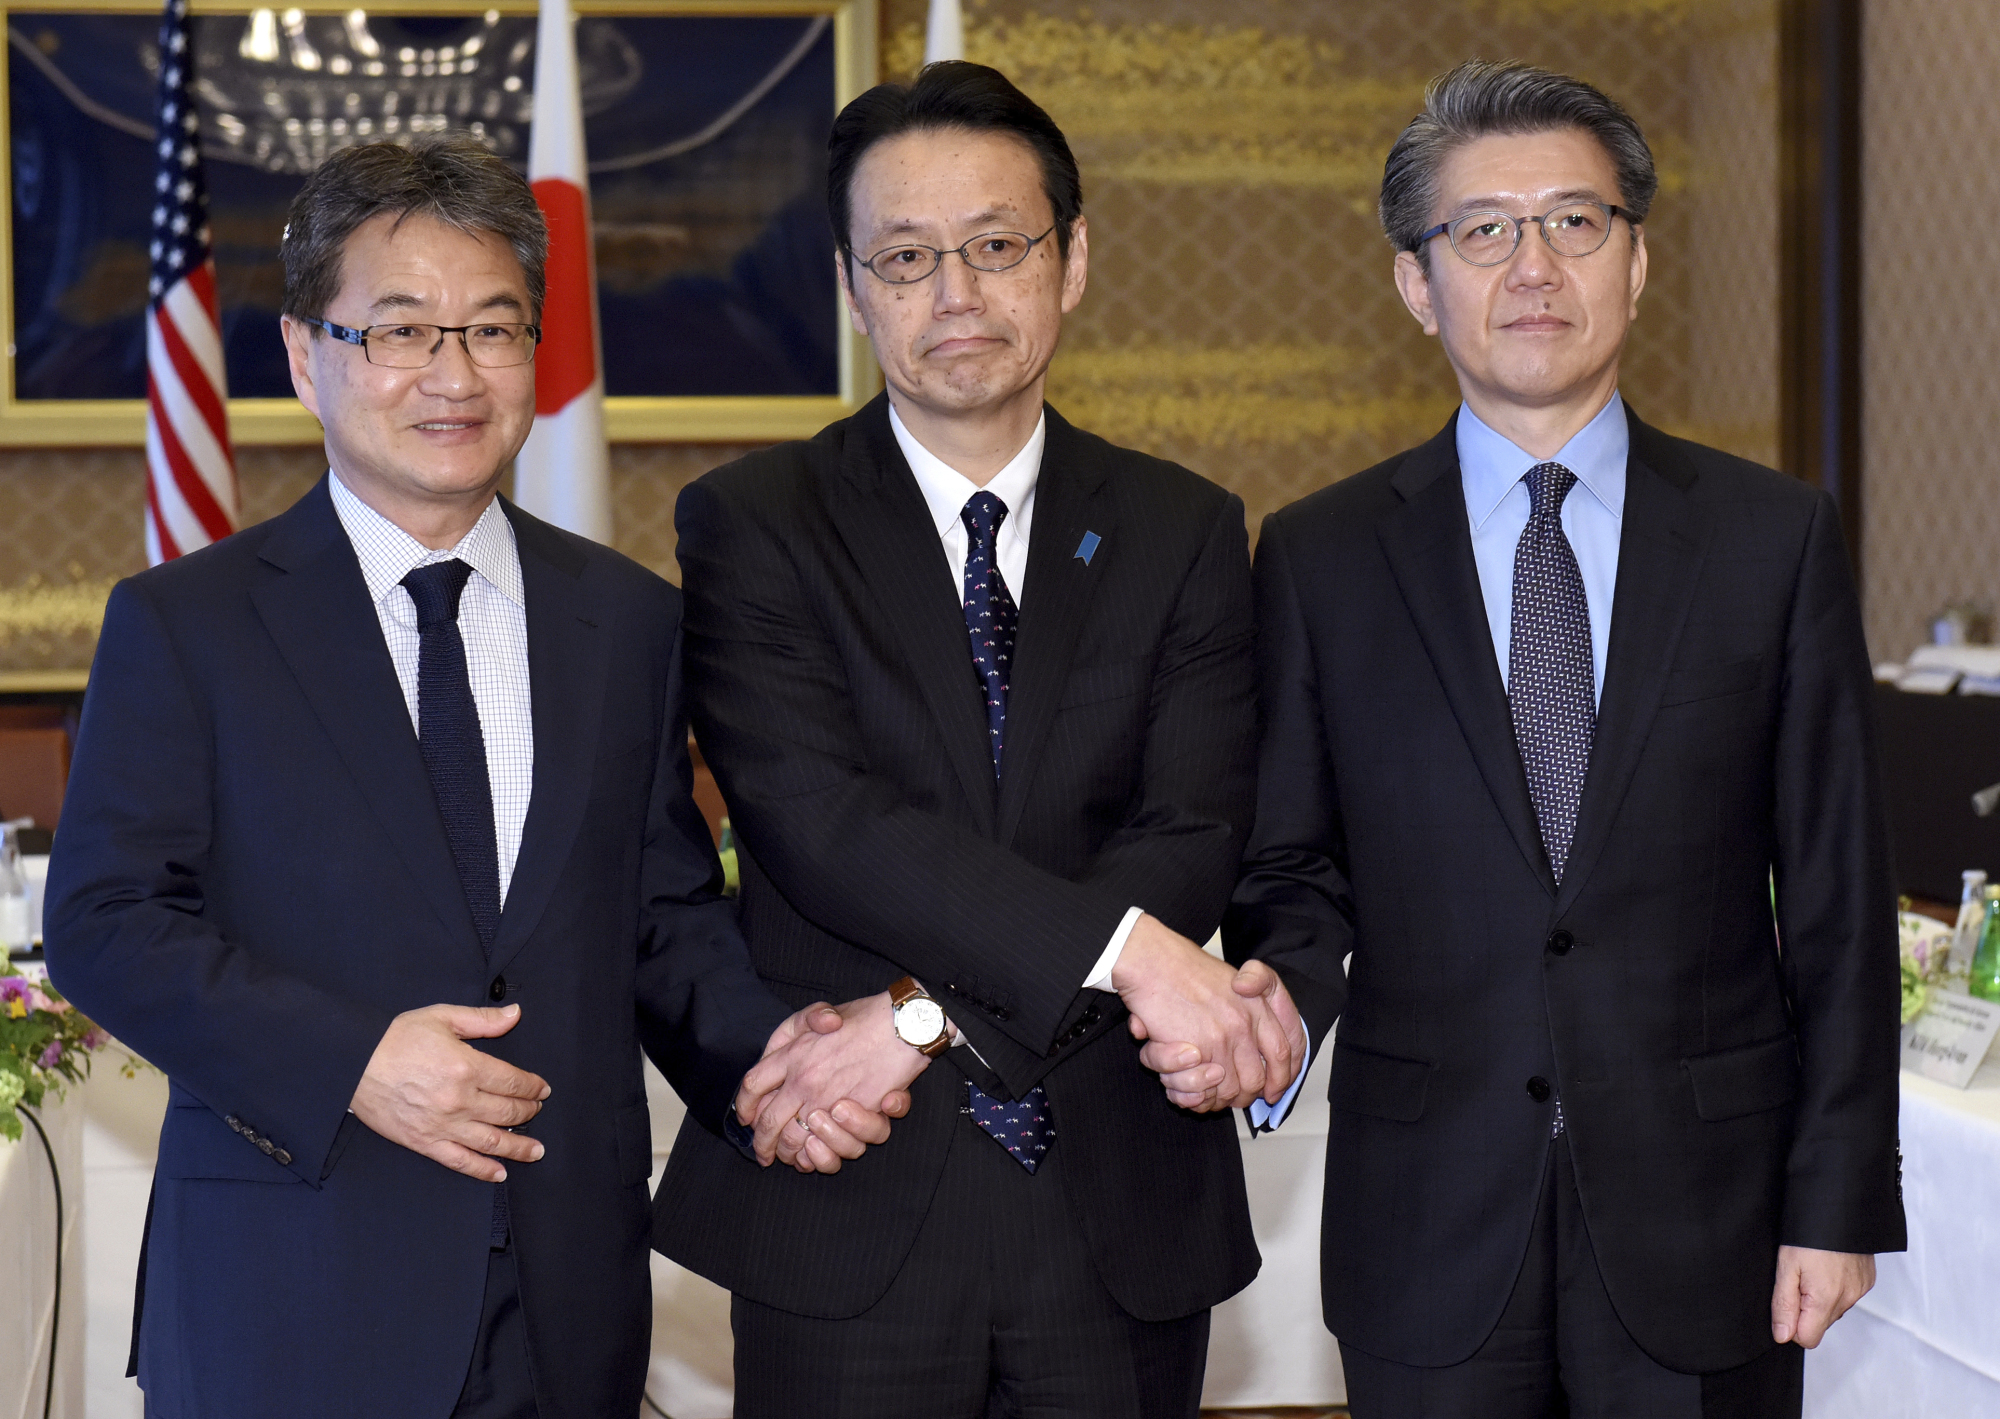 Joseph Yun (from left), U.S. special representative for North Korea policy, Kenji Kanasugi, director-general of the Foreign Ministry's Asian and Oceanian Affairs Bureau, and Kim Hong-kyun, special representative for Korean Peninsula peace and security affairs at the South Korean Foreign Ministry, join hands before their meeting about North Korean issues at the Iikura Guesthouse in Tokyo on Tuesday. | AP